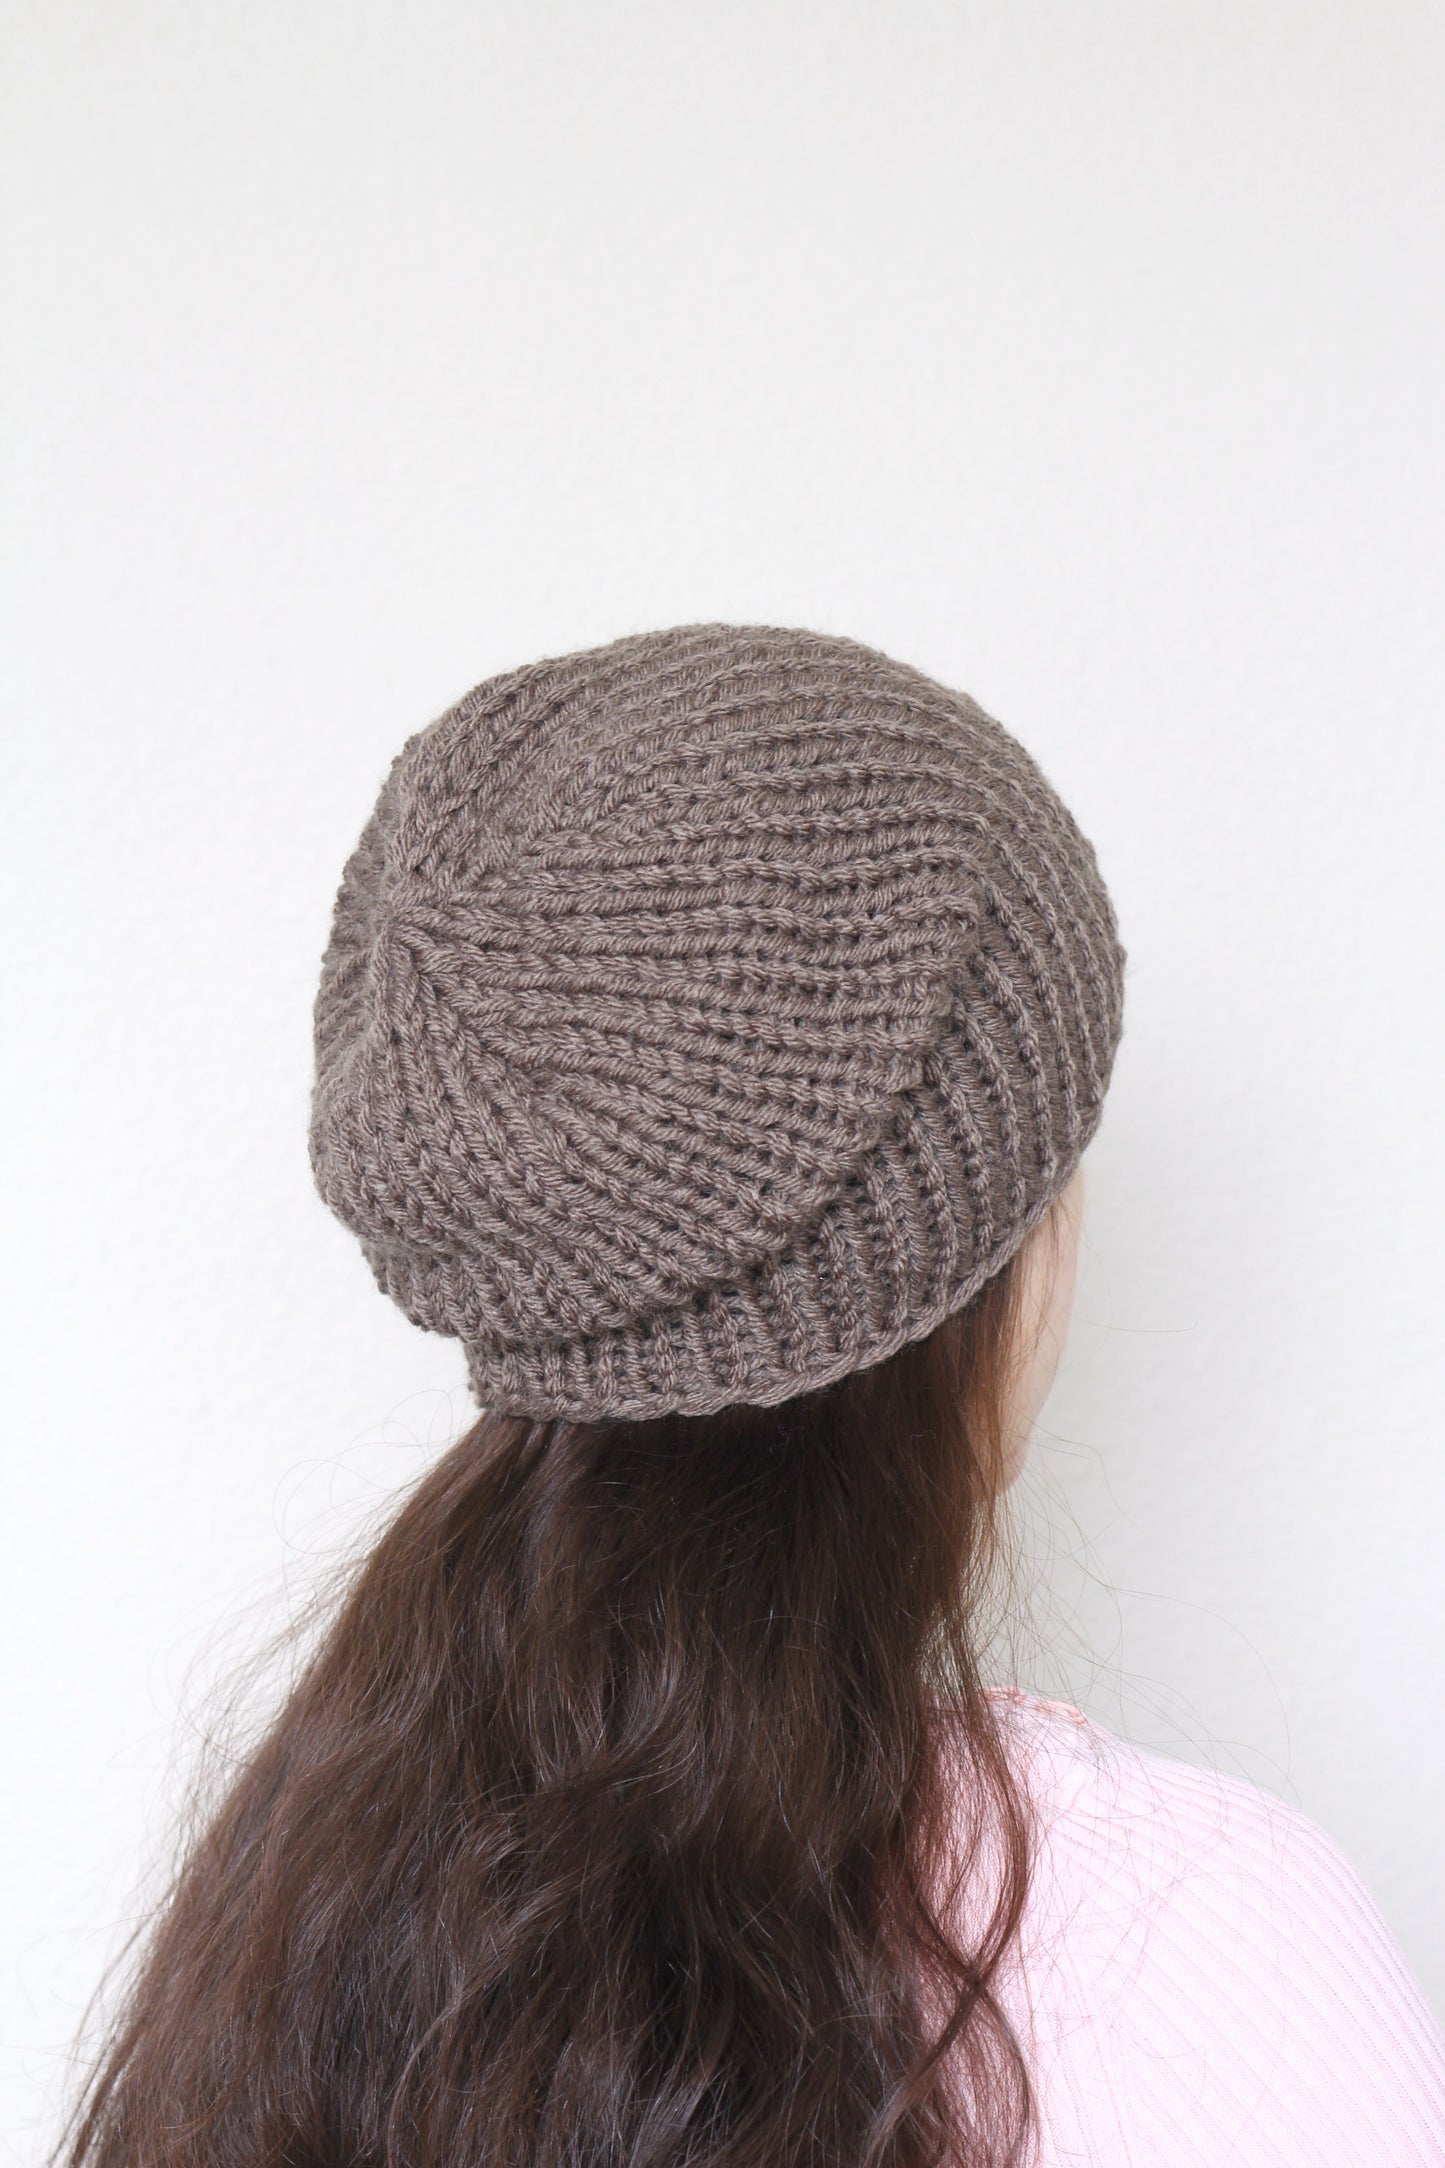 Beanie hat, knit hat, slouchy hat, knit beanie in grey color tweed hat